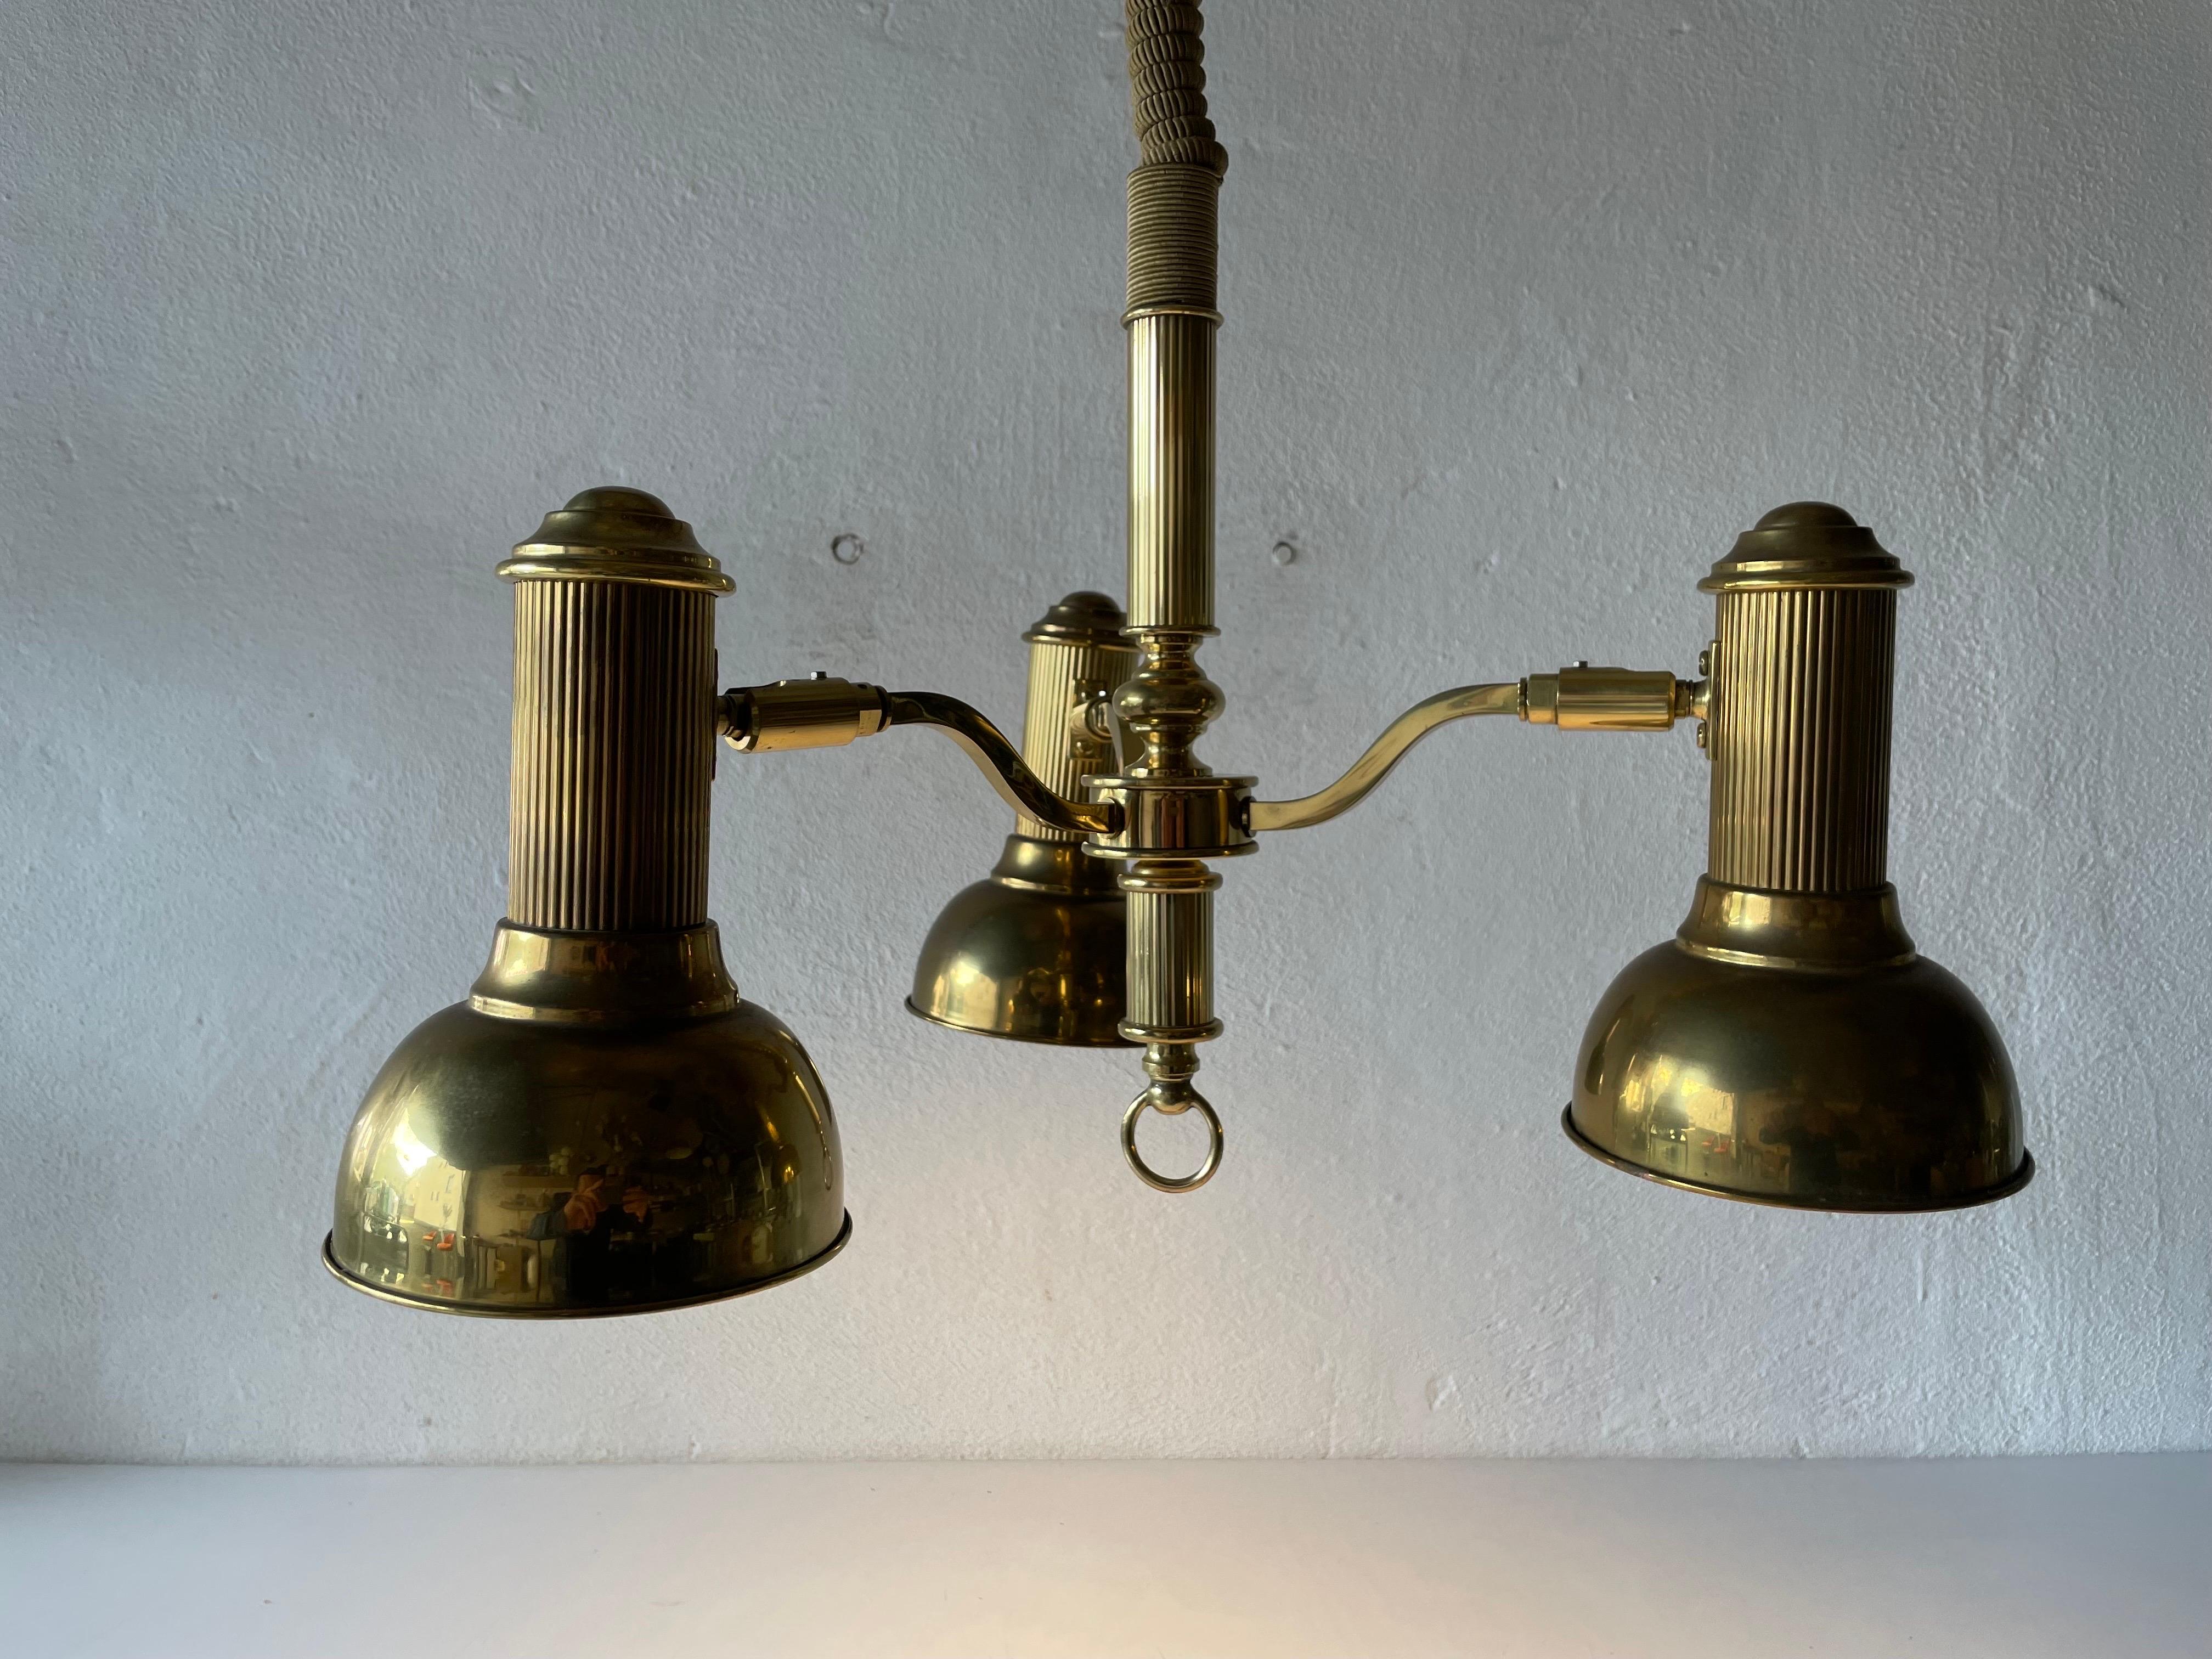 Triple Spot Shade Brass Pendant Lamp by Hillebrand, 1970s, Germany For Sale 6